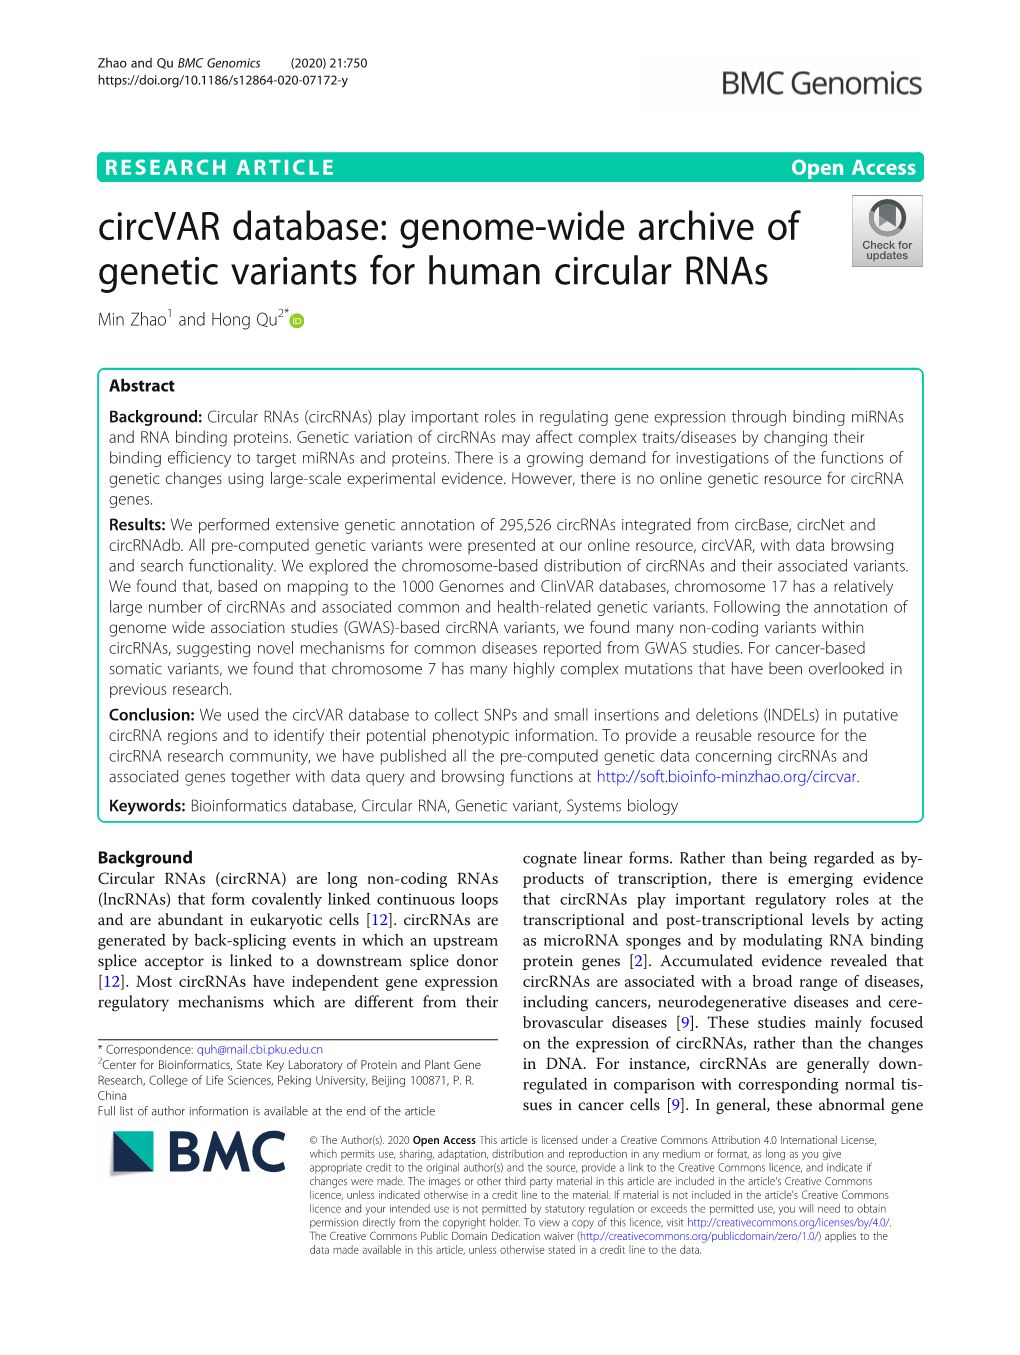 Circvar Database: Genome-Wide Archive of Genetic Variants for Human Circular Rnas Min Zhao1 and Hong Qu2*